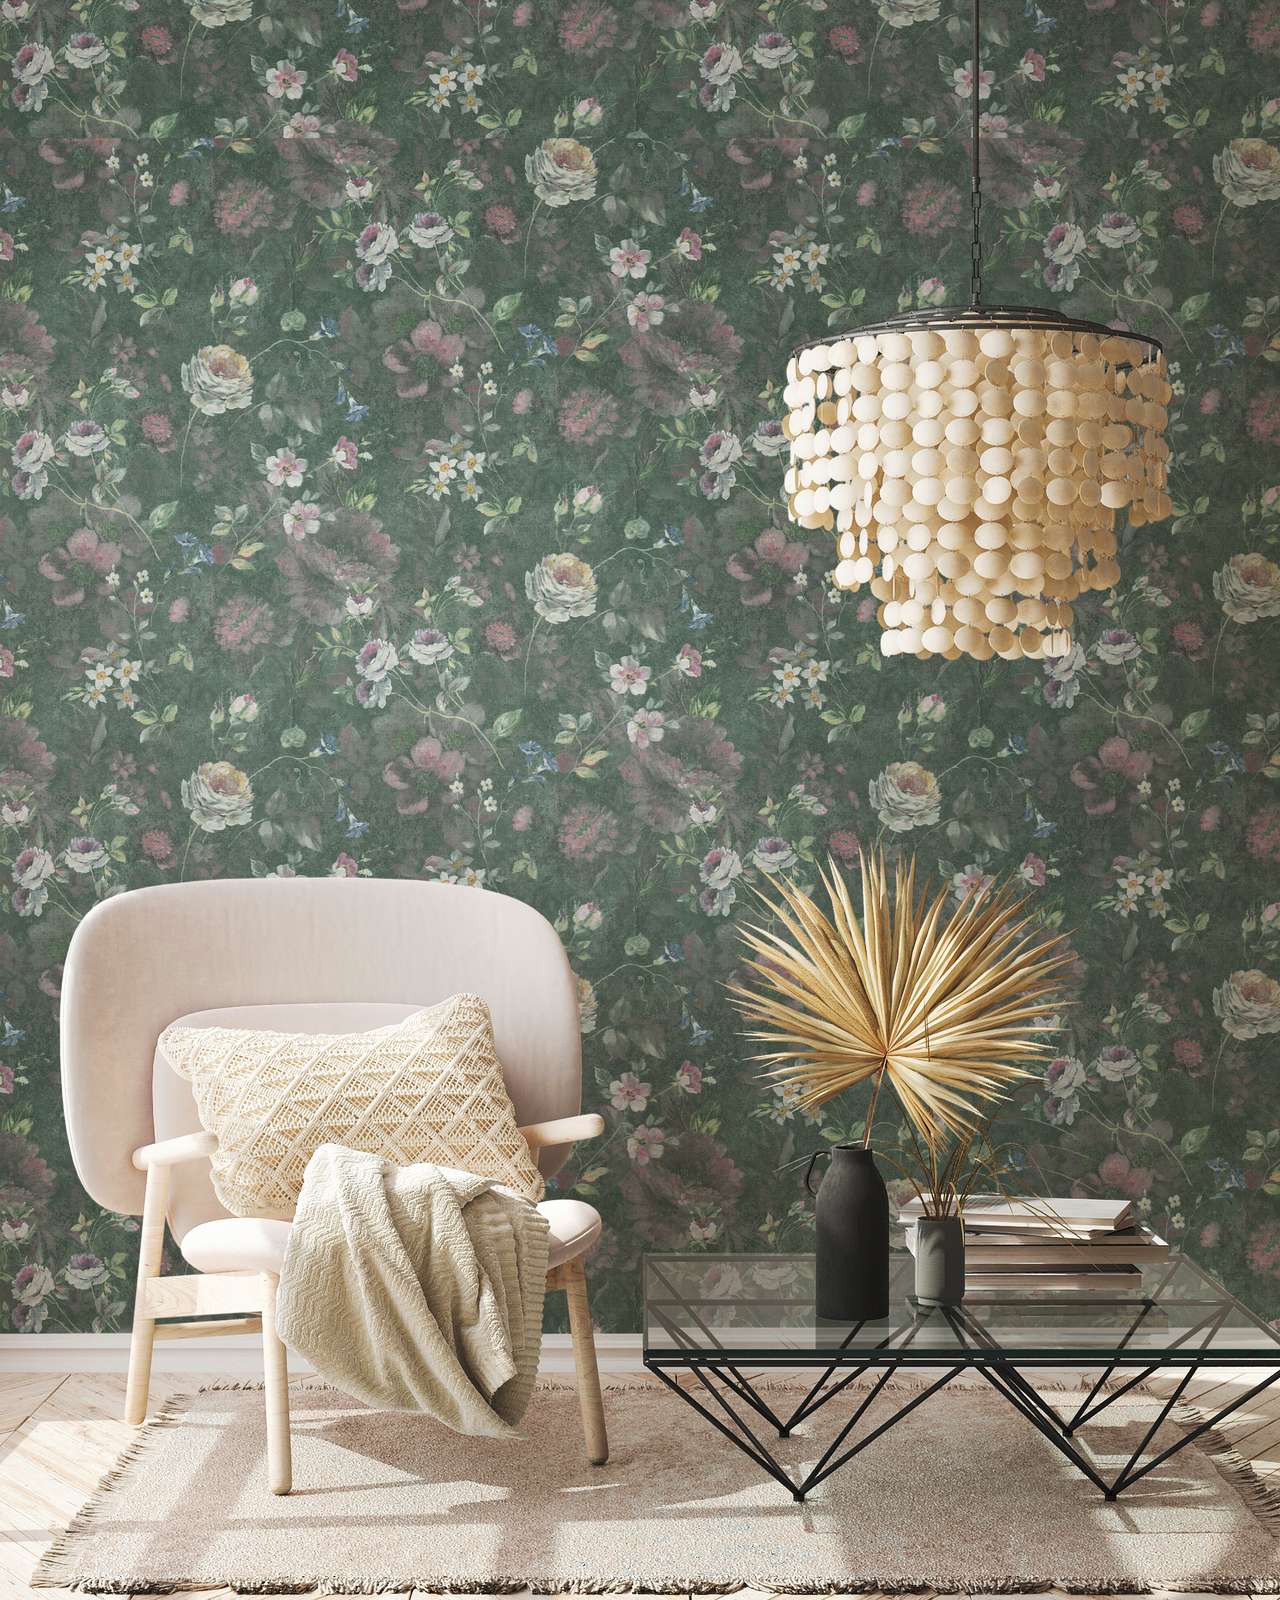             Non-woven wallpaper with painted floral pattern PVC-free - green, white, pink
        